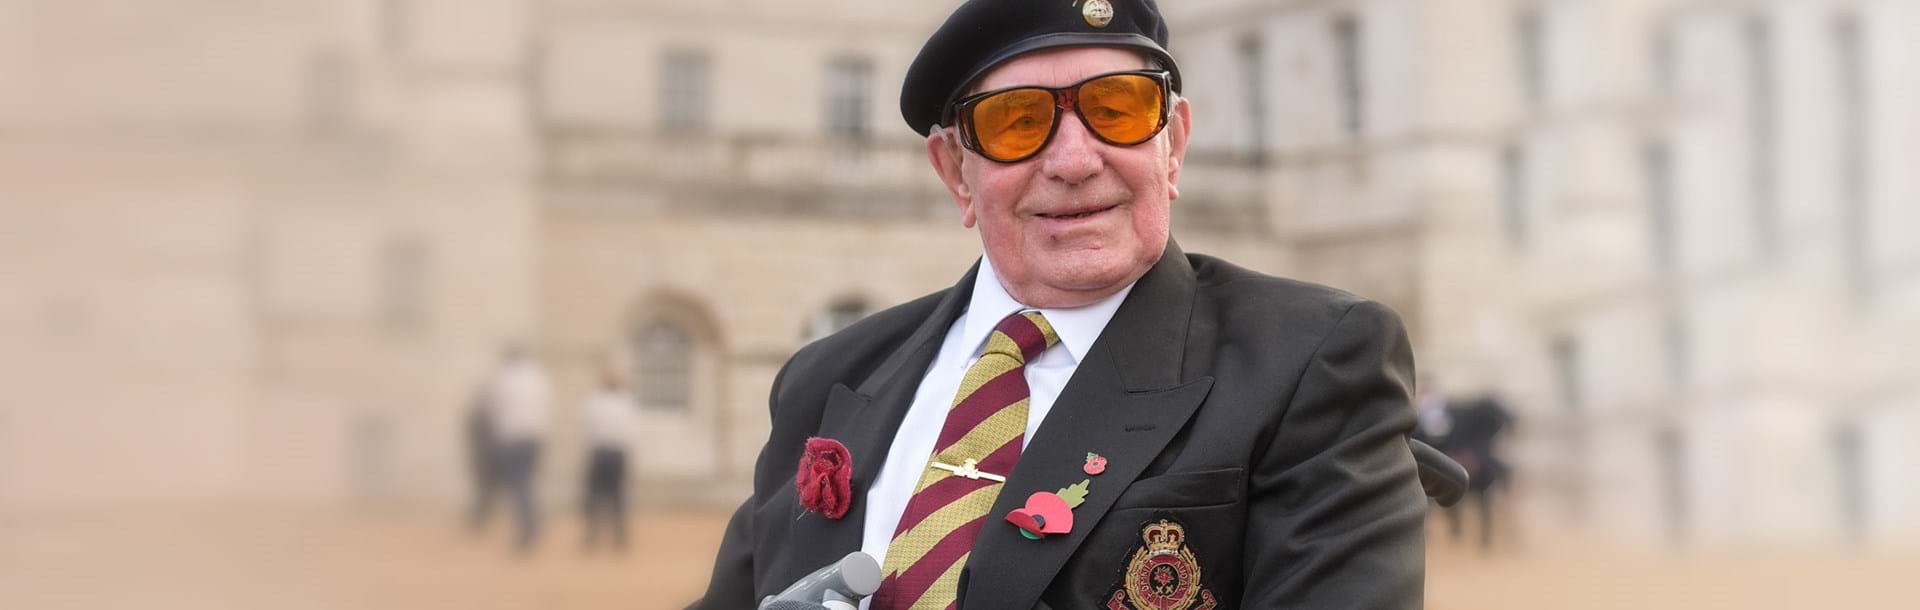 A smiling blind veteran wearing large orange tint glasses, a beret, with military medals and poppy pinned to his jacket.